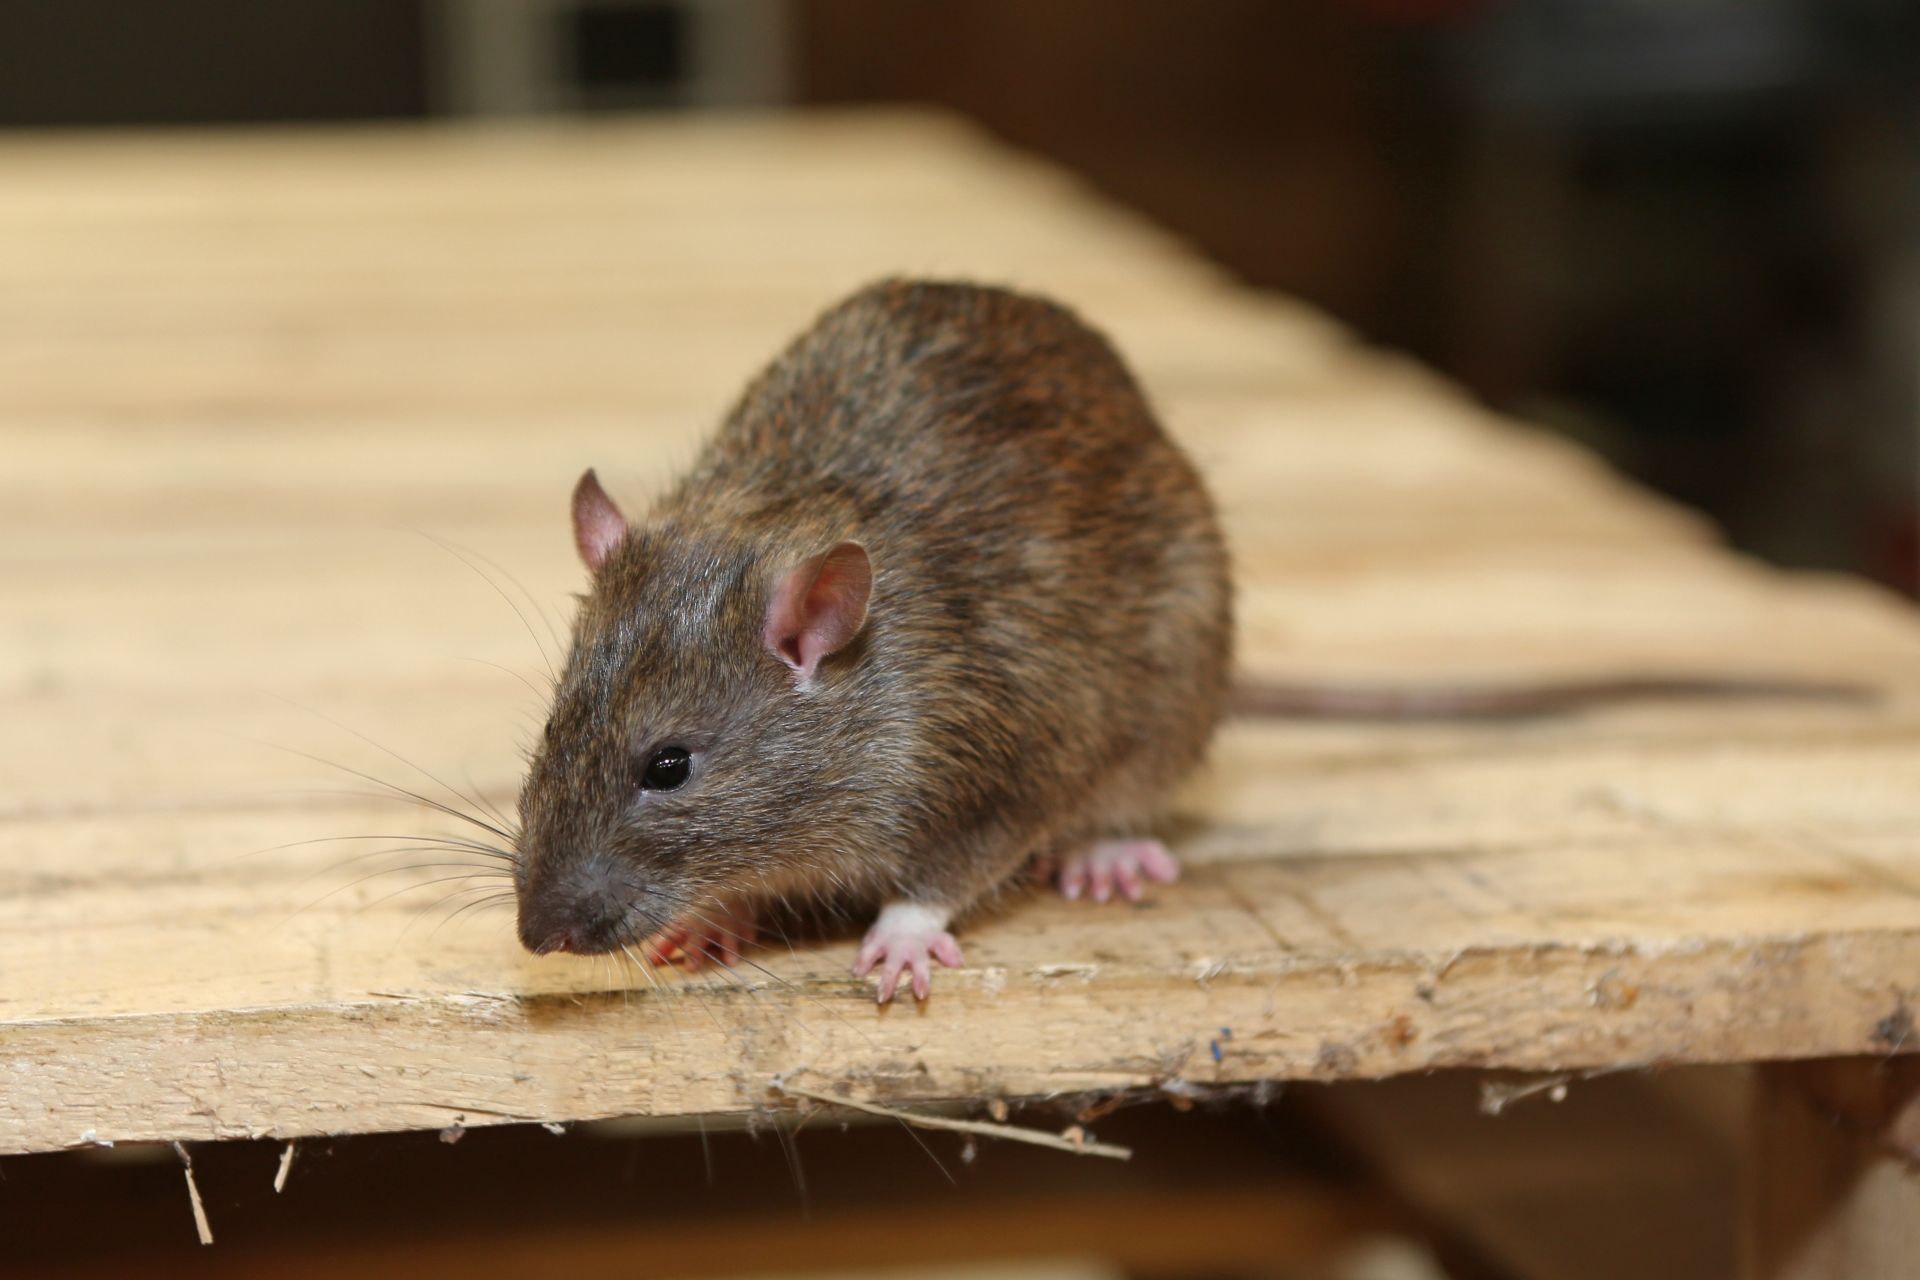 Rat Control, Pest Control in Highgate, N6. Call Now 020 8166 9746